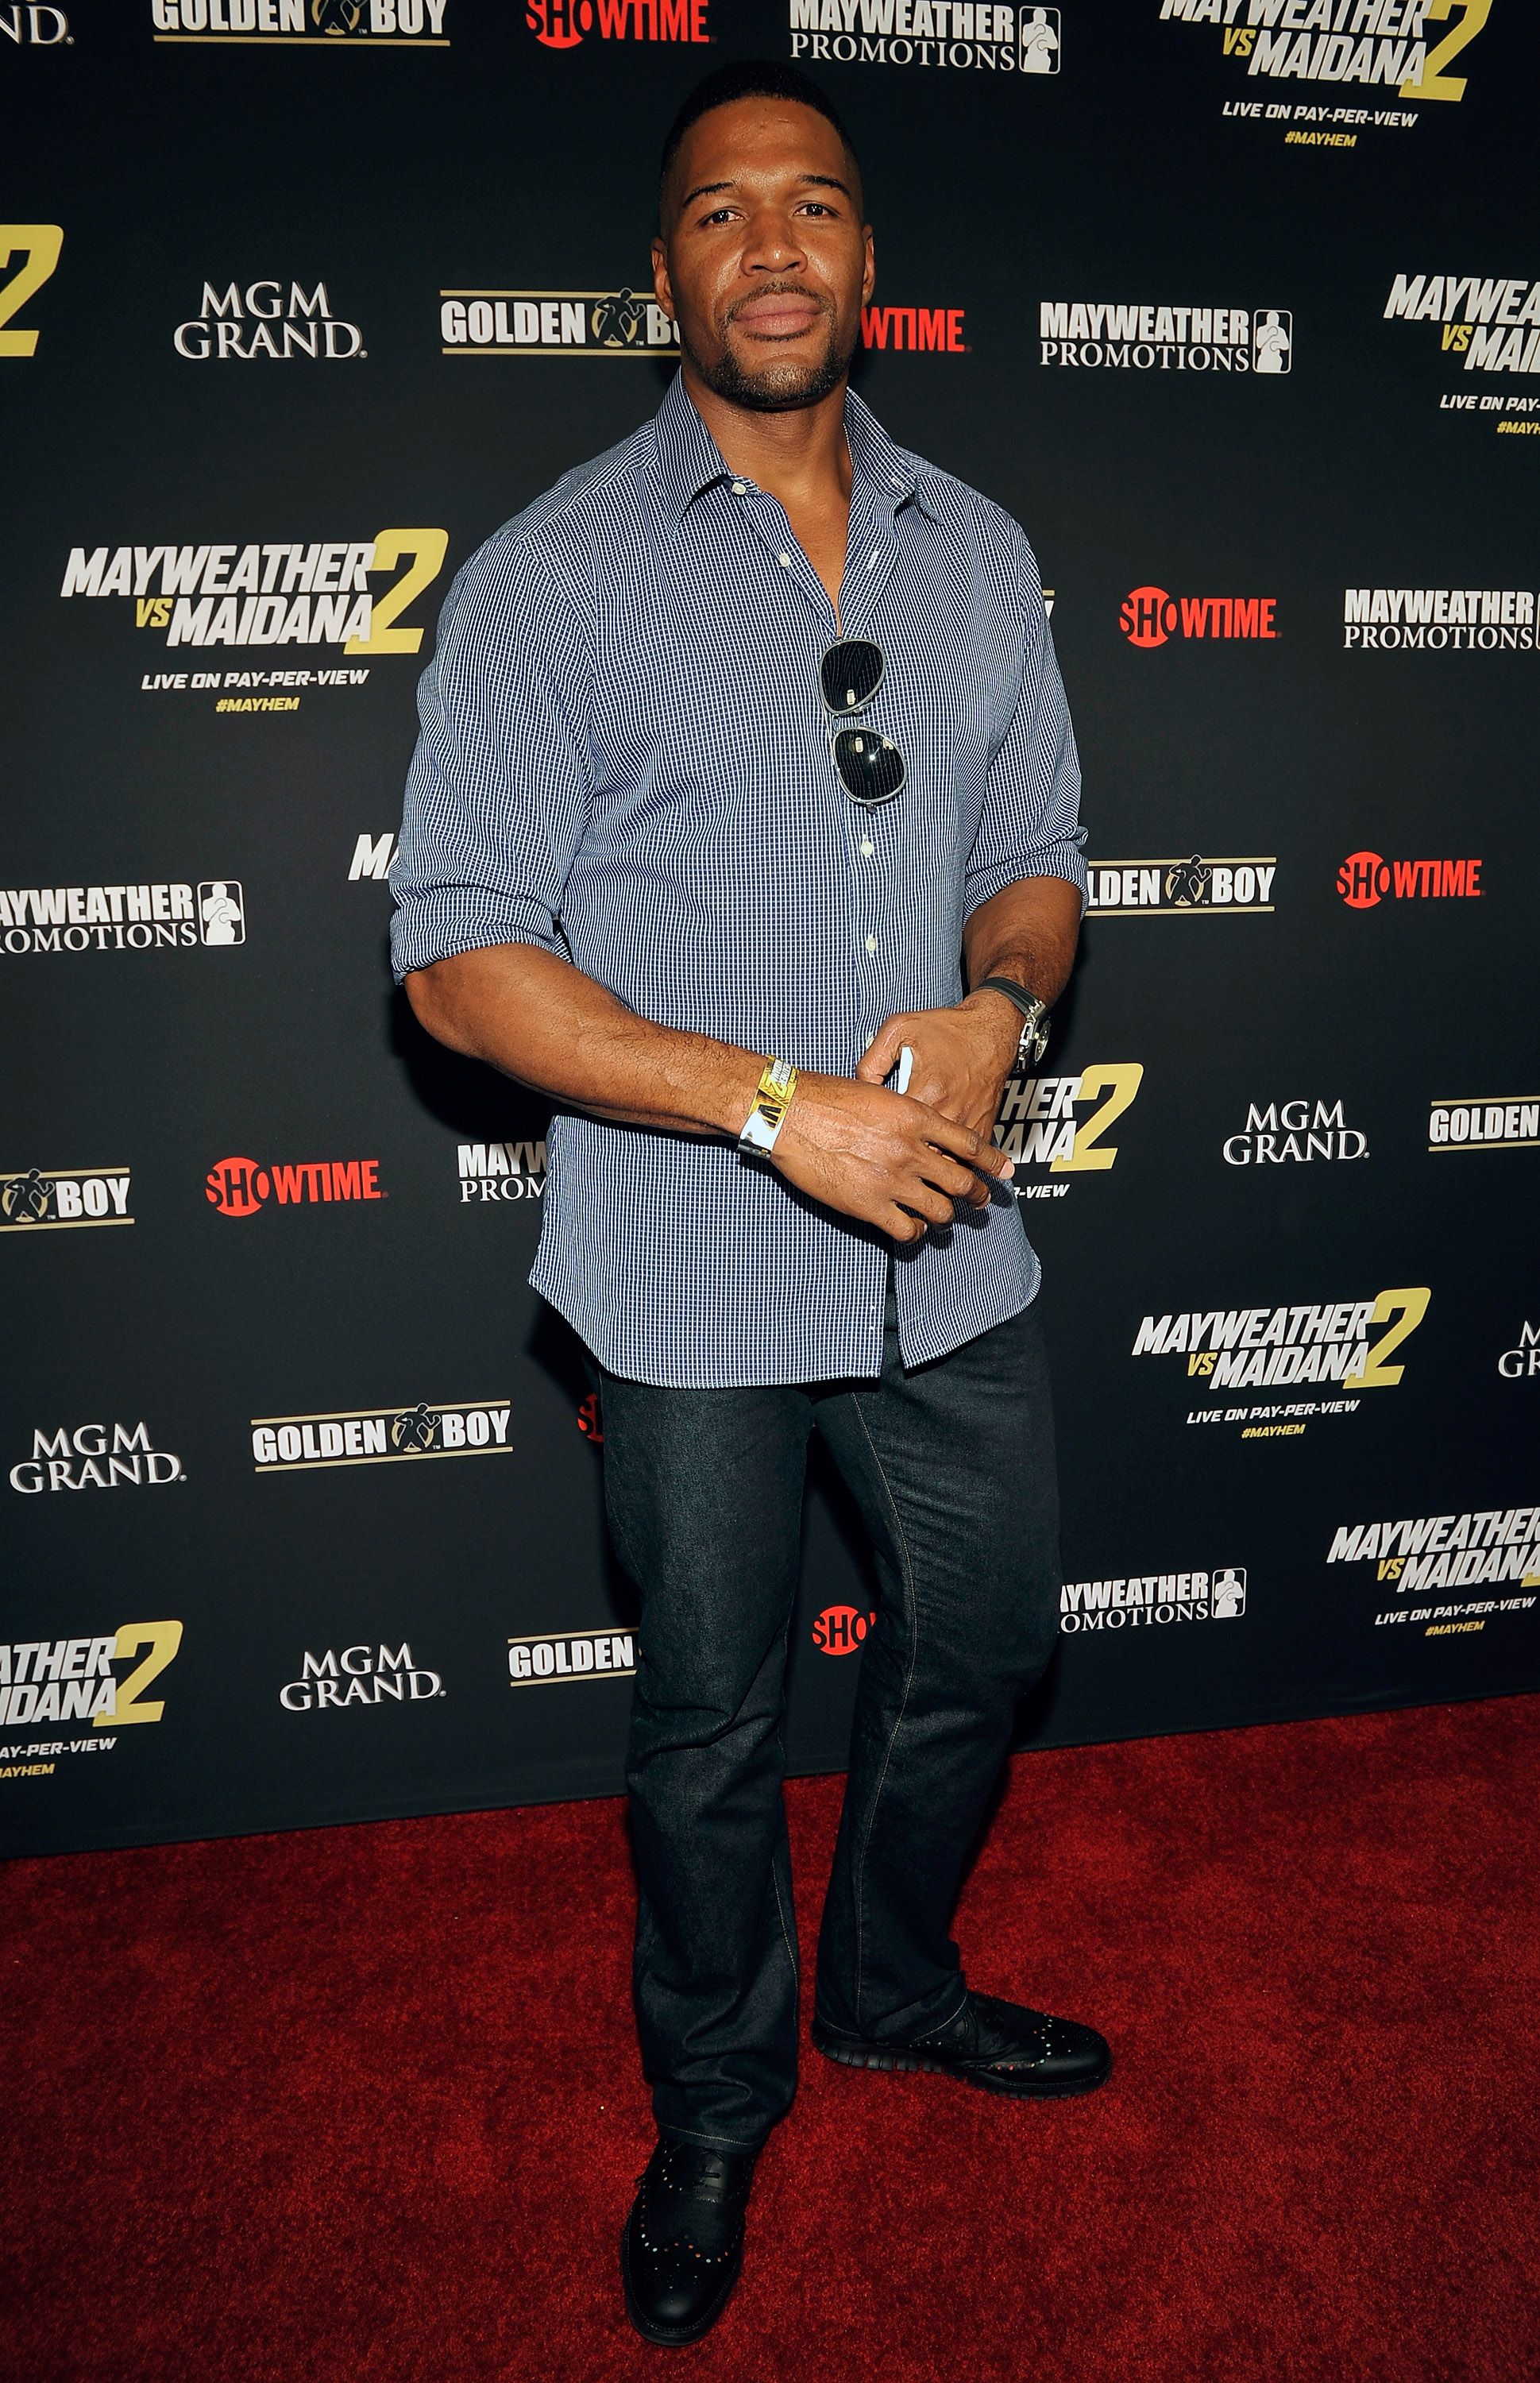 Michael Strahan arriving at Showtime's VIP prefight party for "Mayhem: Mayweather vs. Maidana 2" on September 13, 2014 in Las Vegas. | Photo: Getty Images